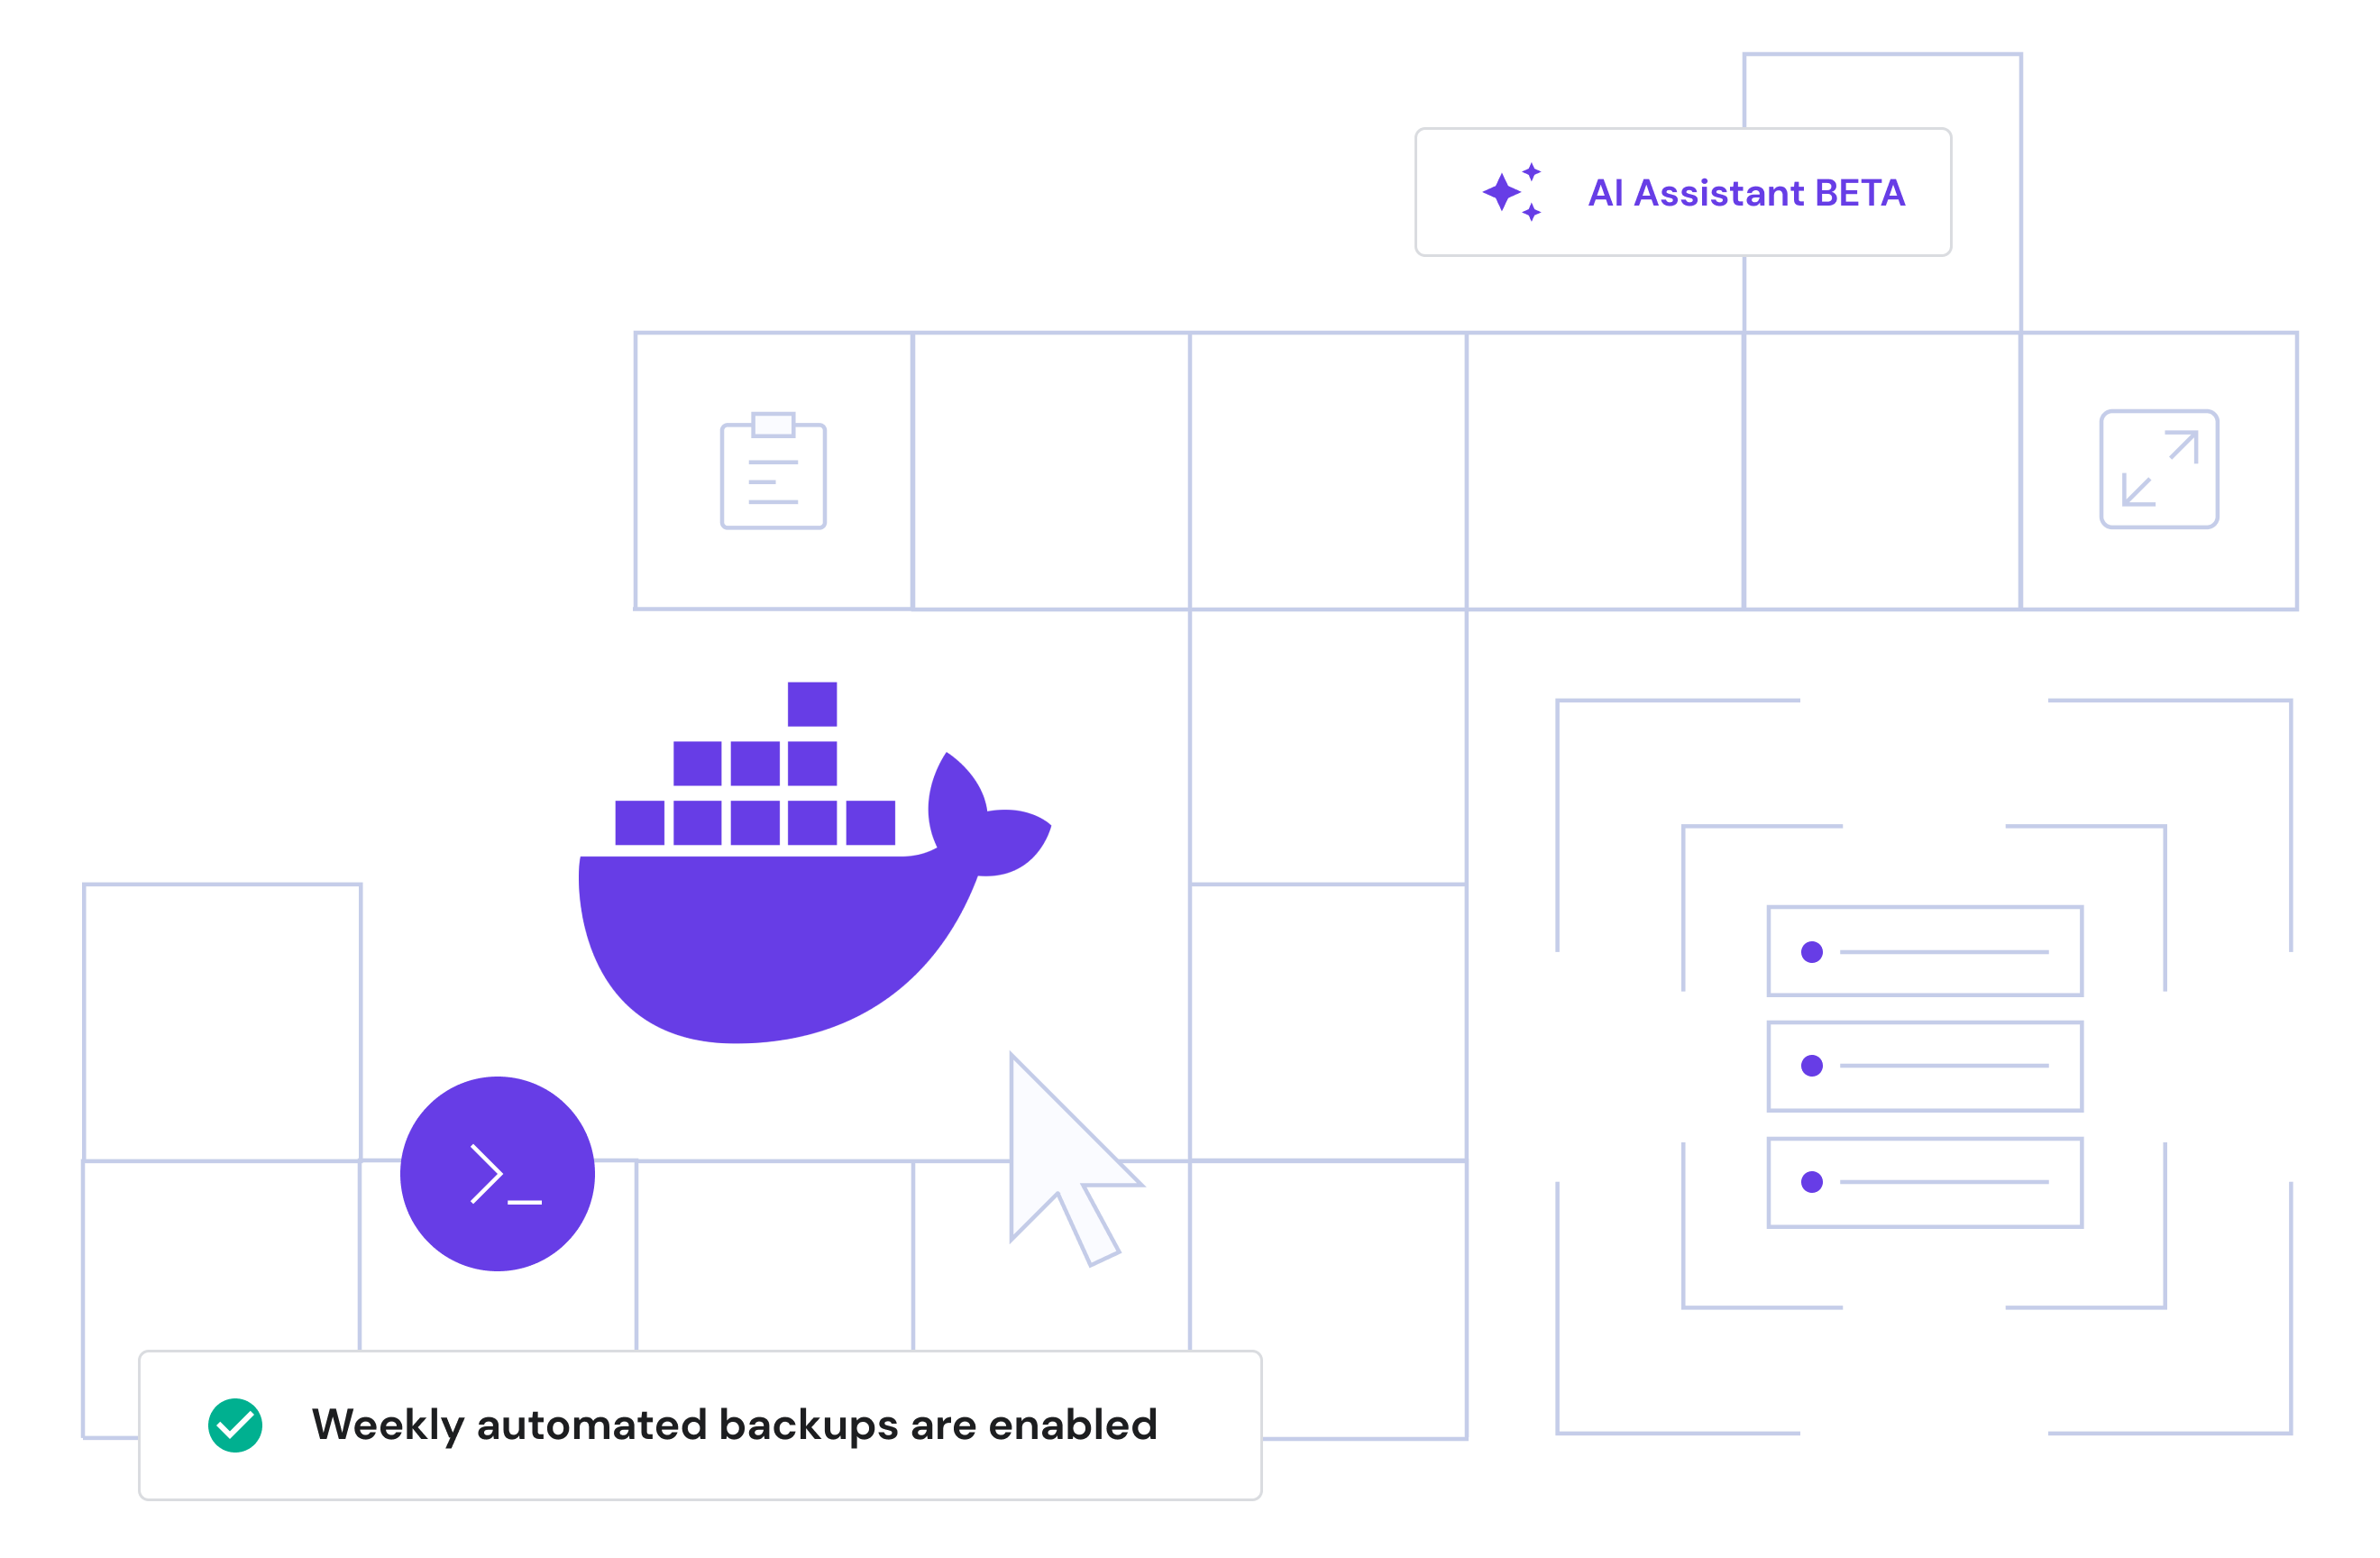 Docker Hosting with AI assistant and weekly automated backups